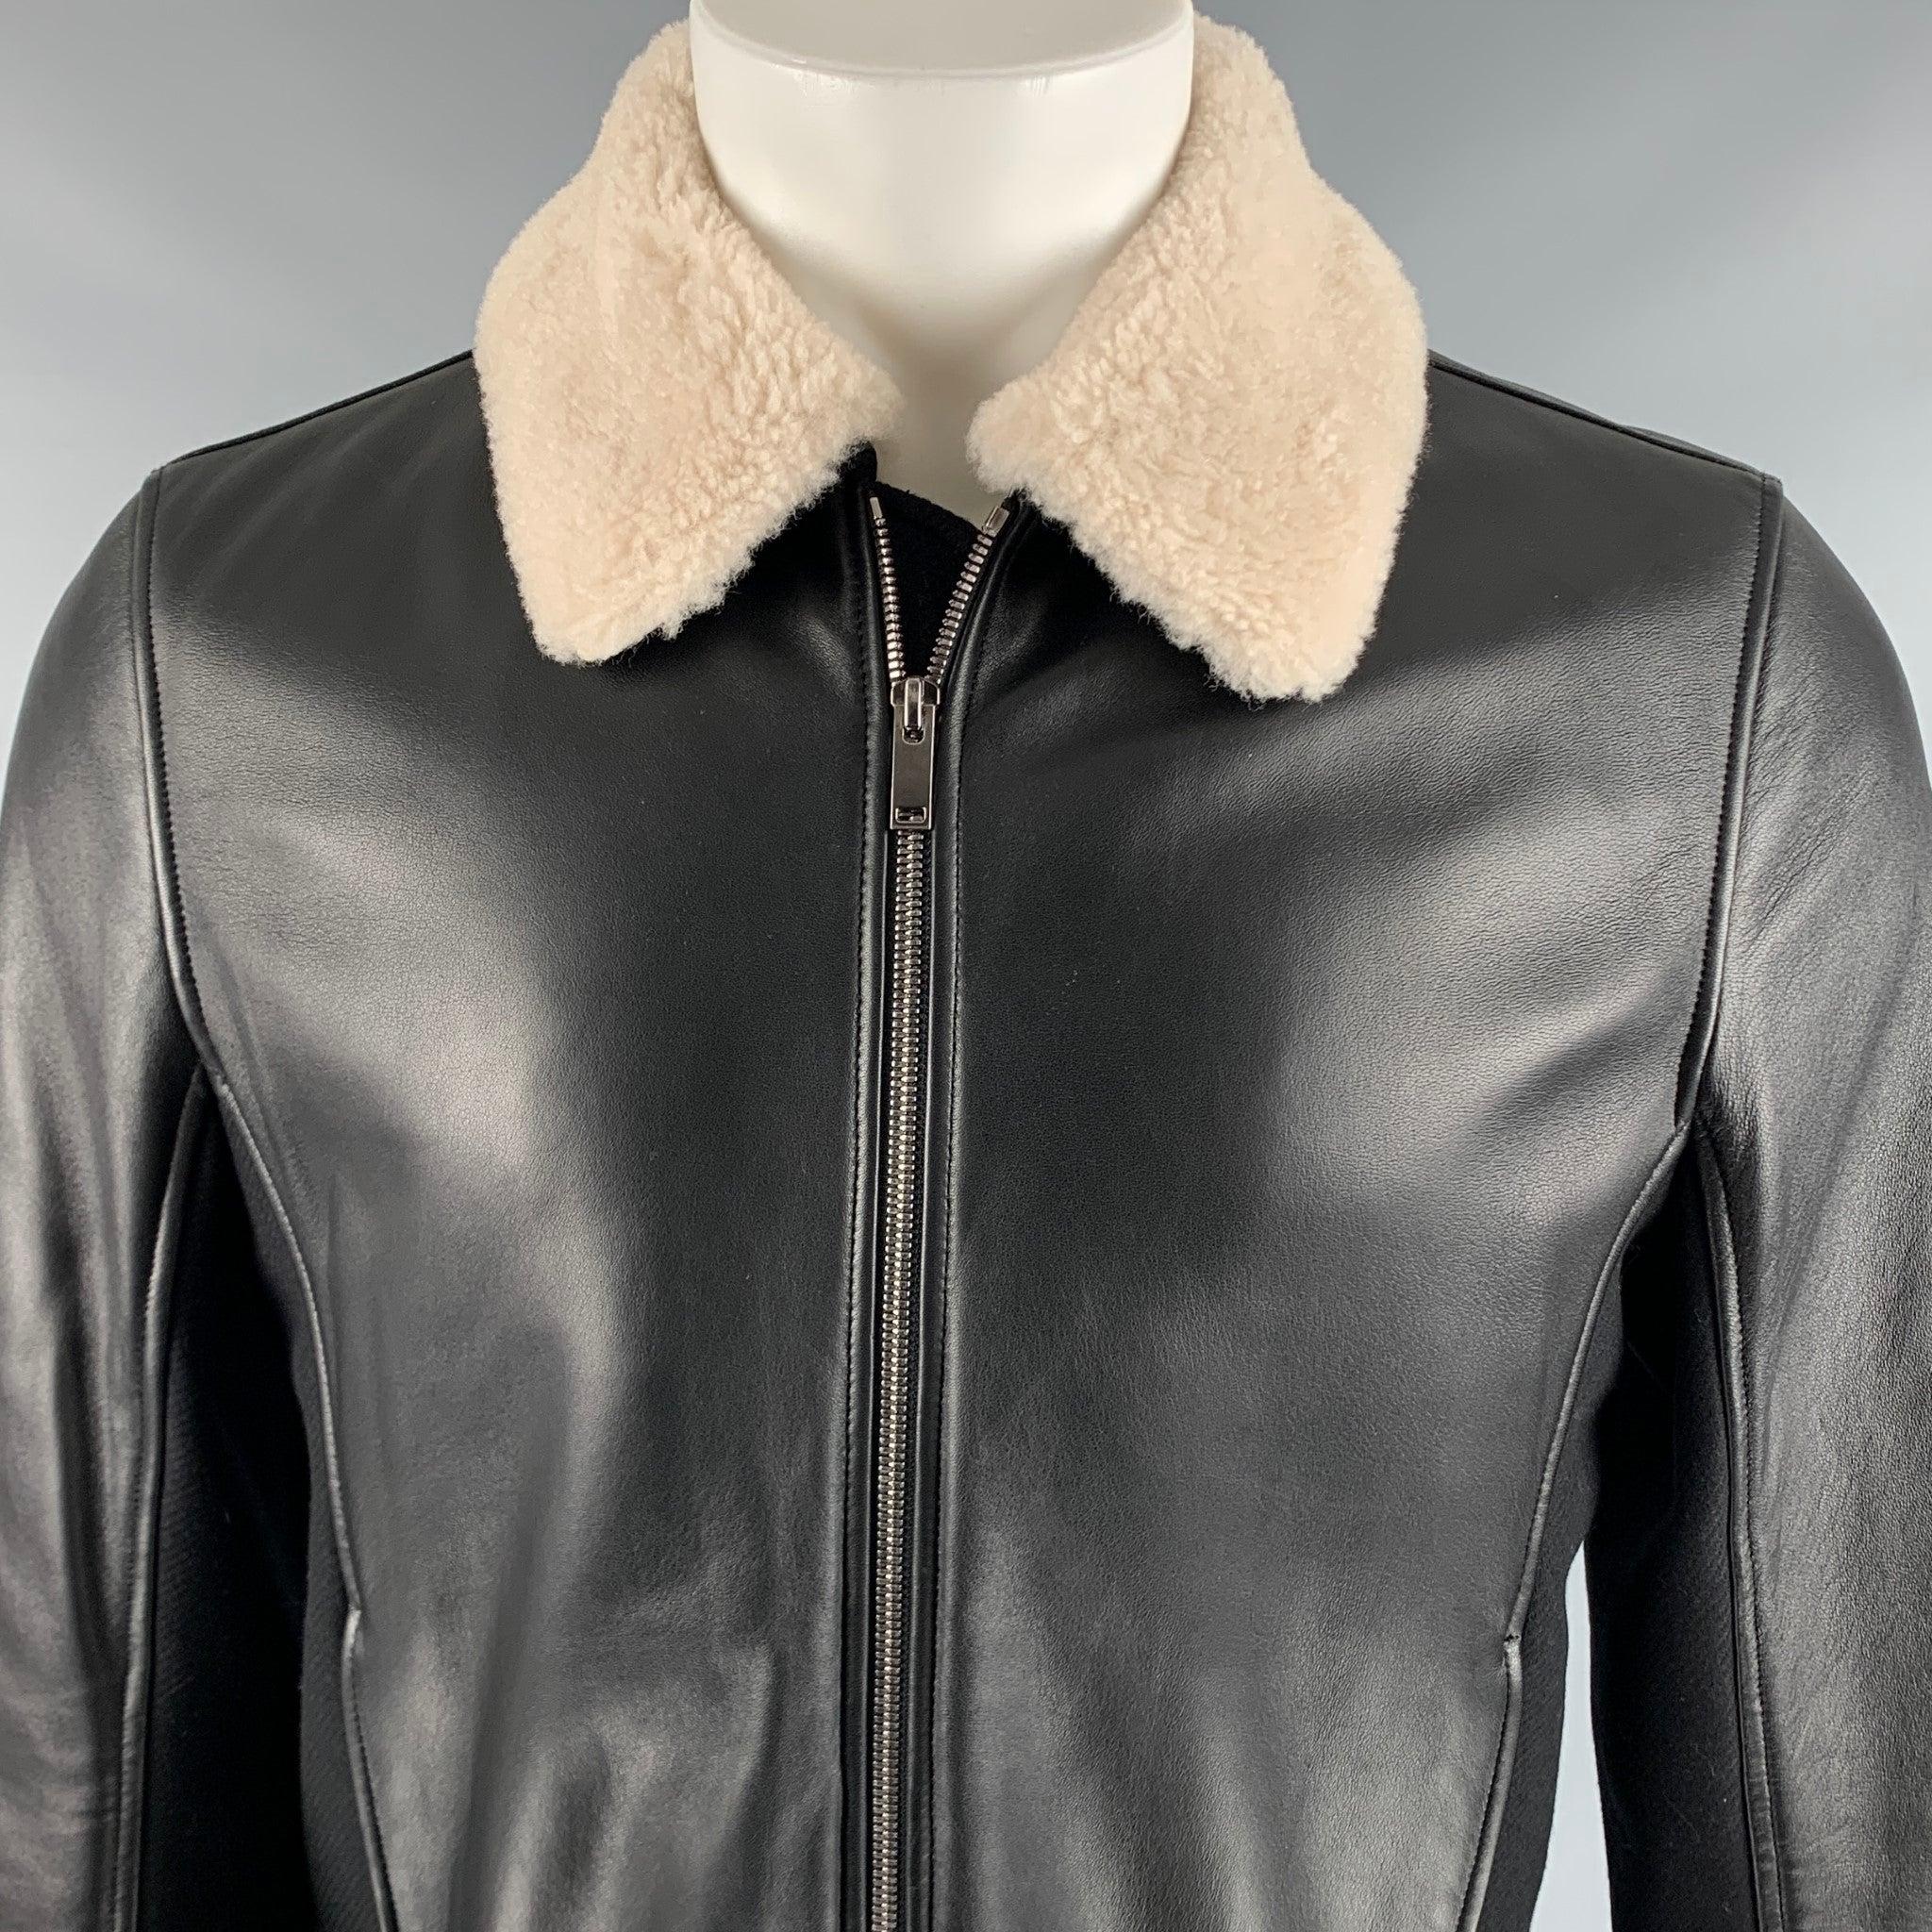 THEORY jacket
in a
black lambskin leather fabric featuring bomber style, detachable shearling collar, two pockets, and a zip up closure.Very Good Pre-Owned Condition. Minor mark on back. 

Marked:   M 

Measurements: 
 
Shoulder: 17 inches Chest: 40